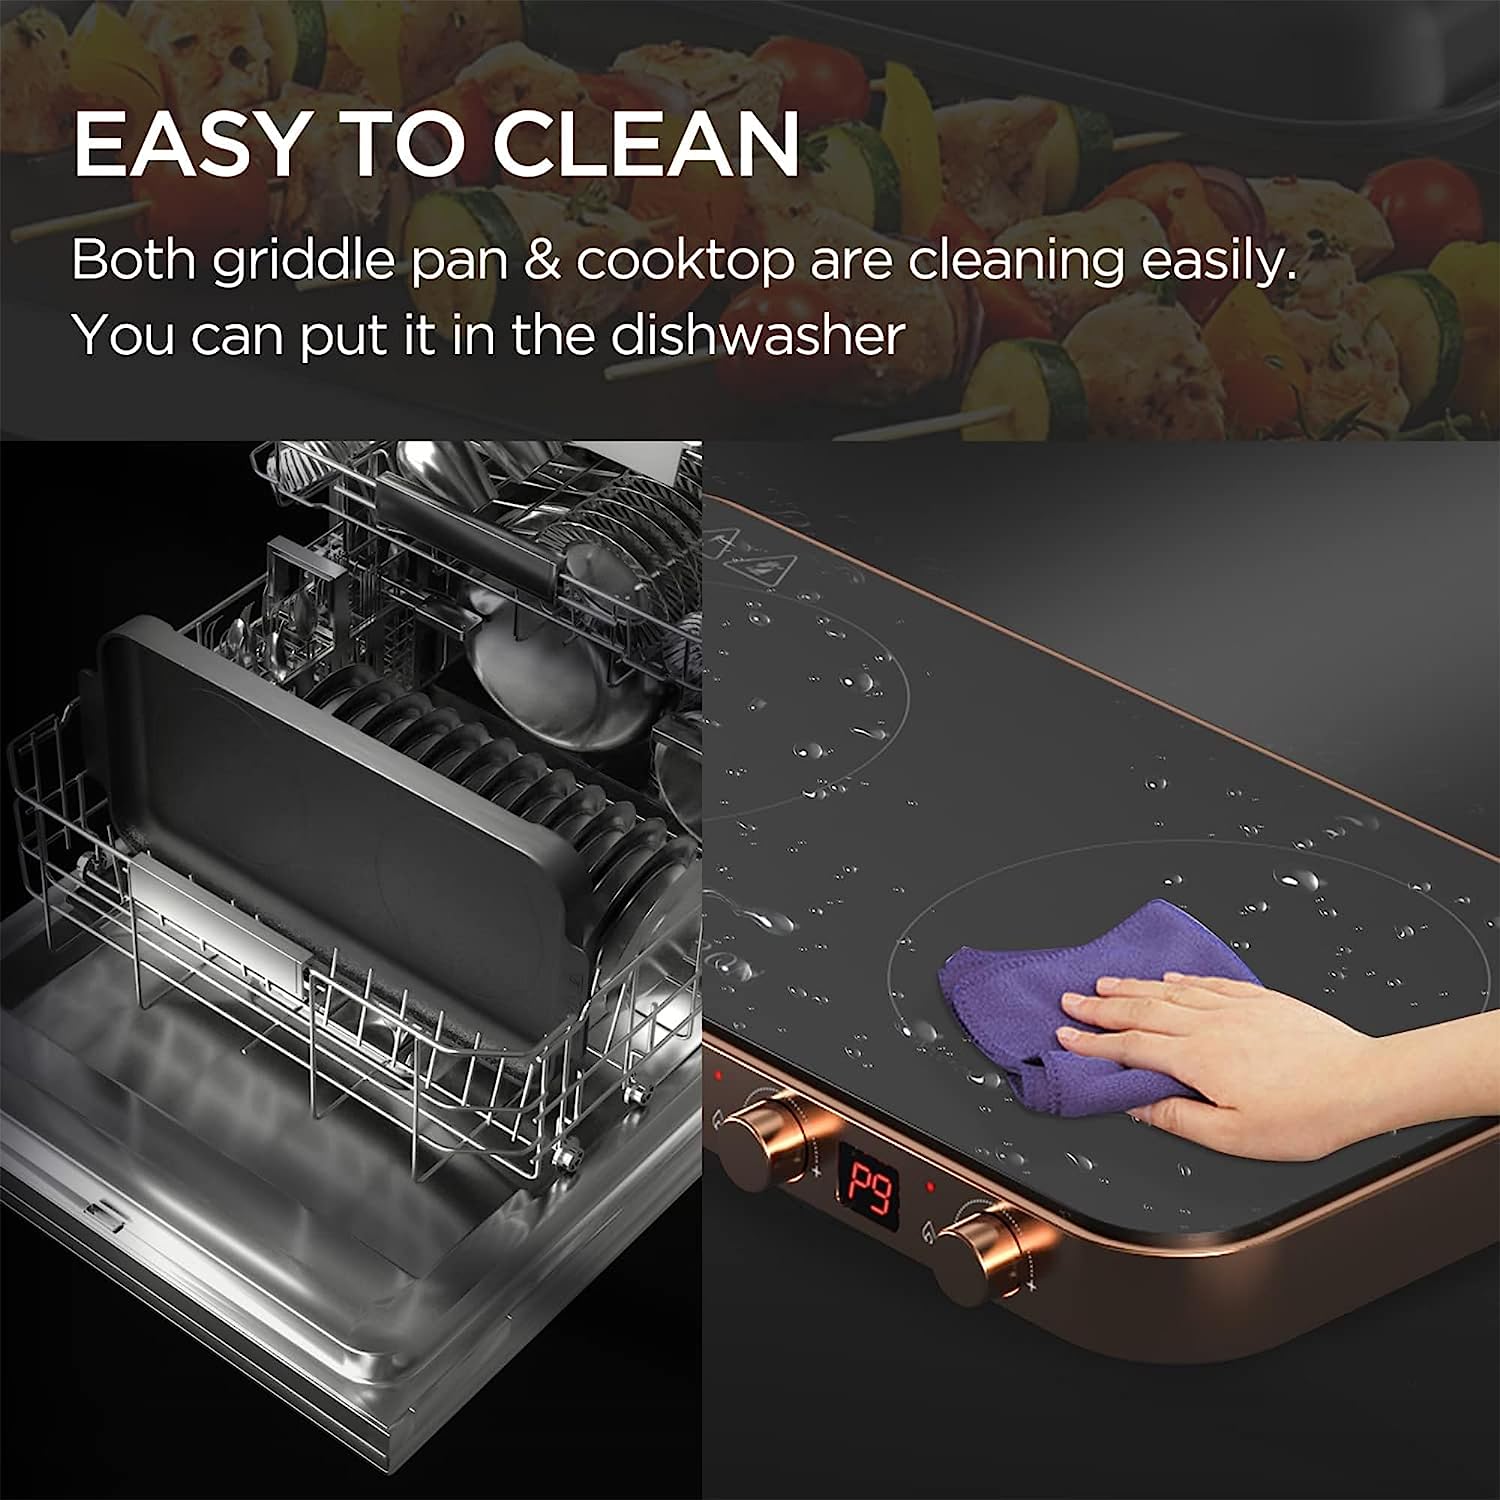 https://bigbigmart.com/wp-content/uploads/2023/07/COOKTRON-Portable-Compact-2-Burner-Induction-Cooktop-Electric-Stove-w-Smokeless-Cast-Iron-Griddle-Grill-Temperature-Control-Child-Lock-Rose-Gold6.jpg